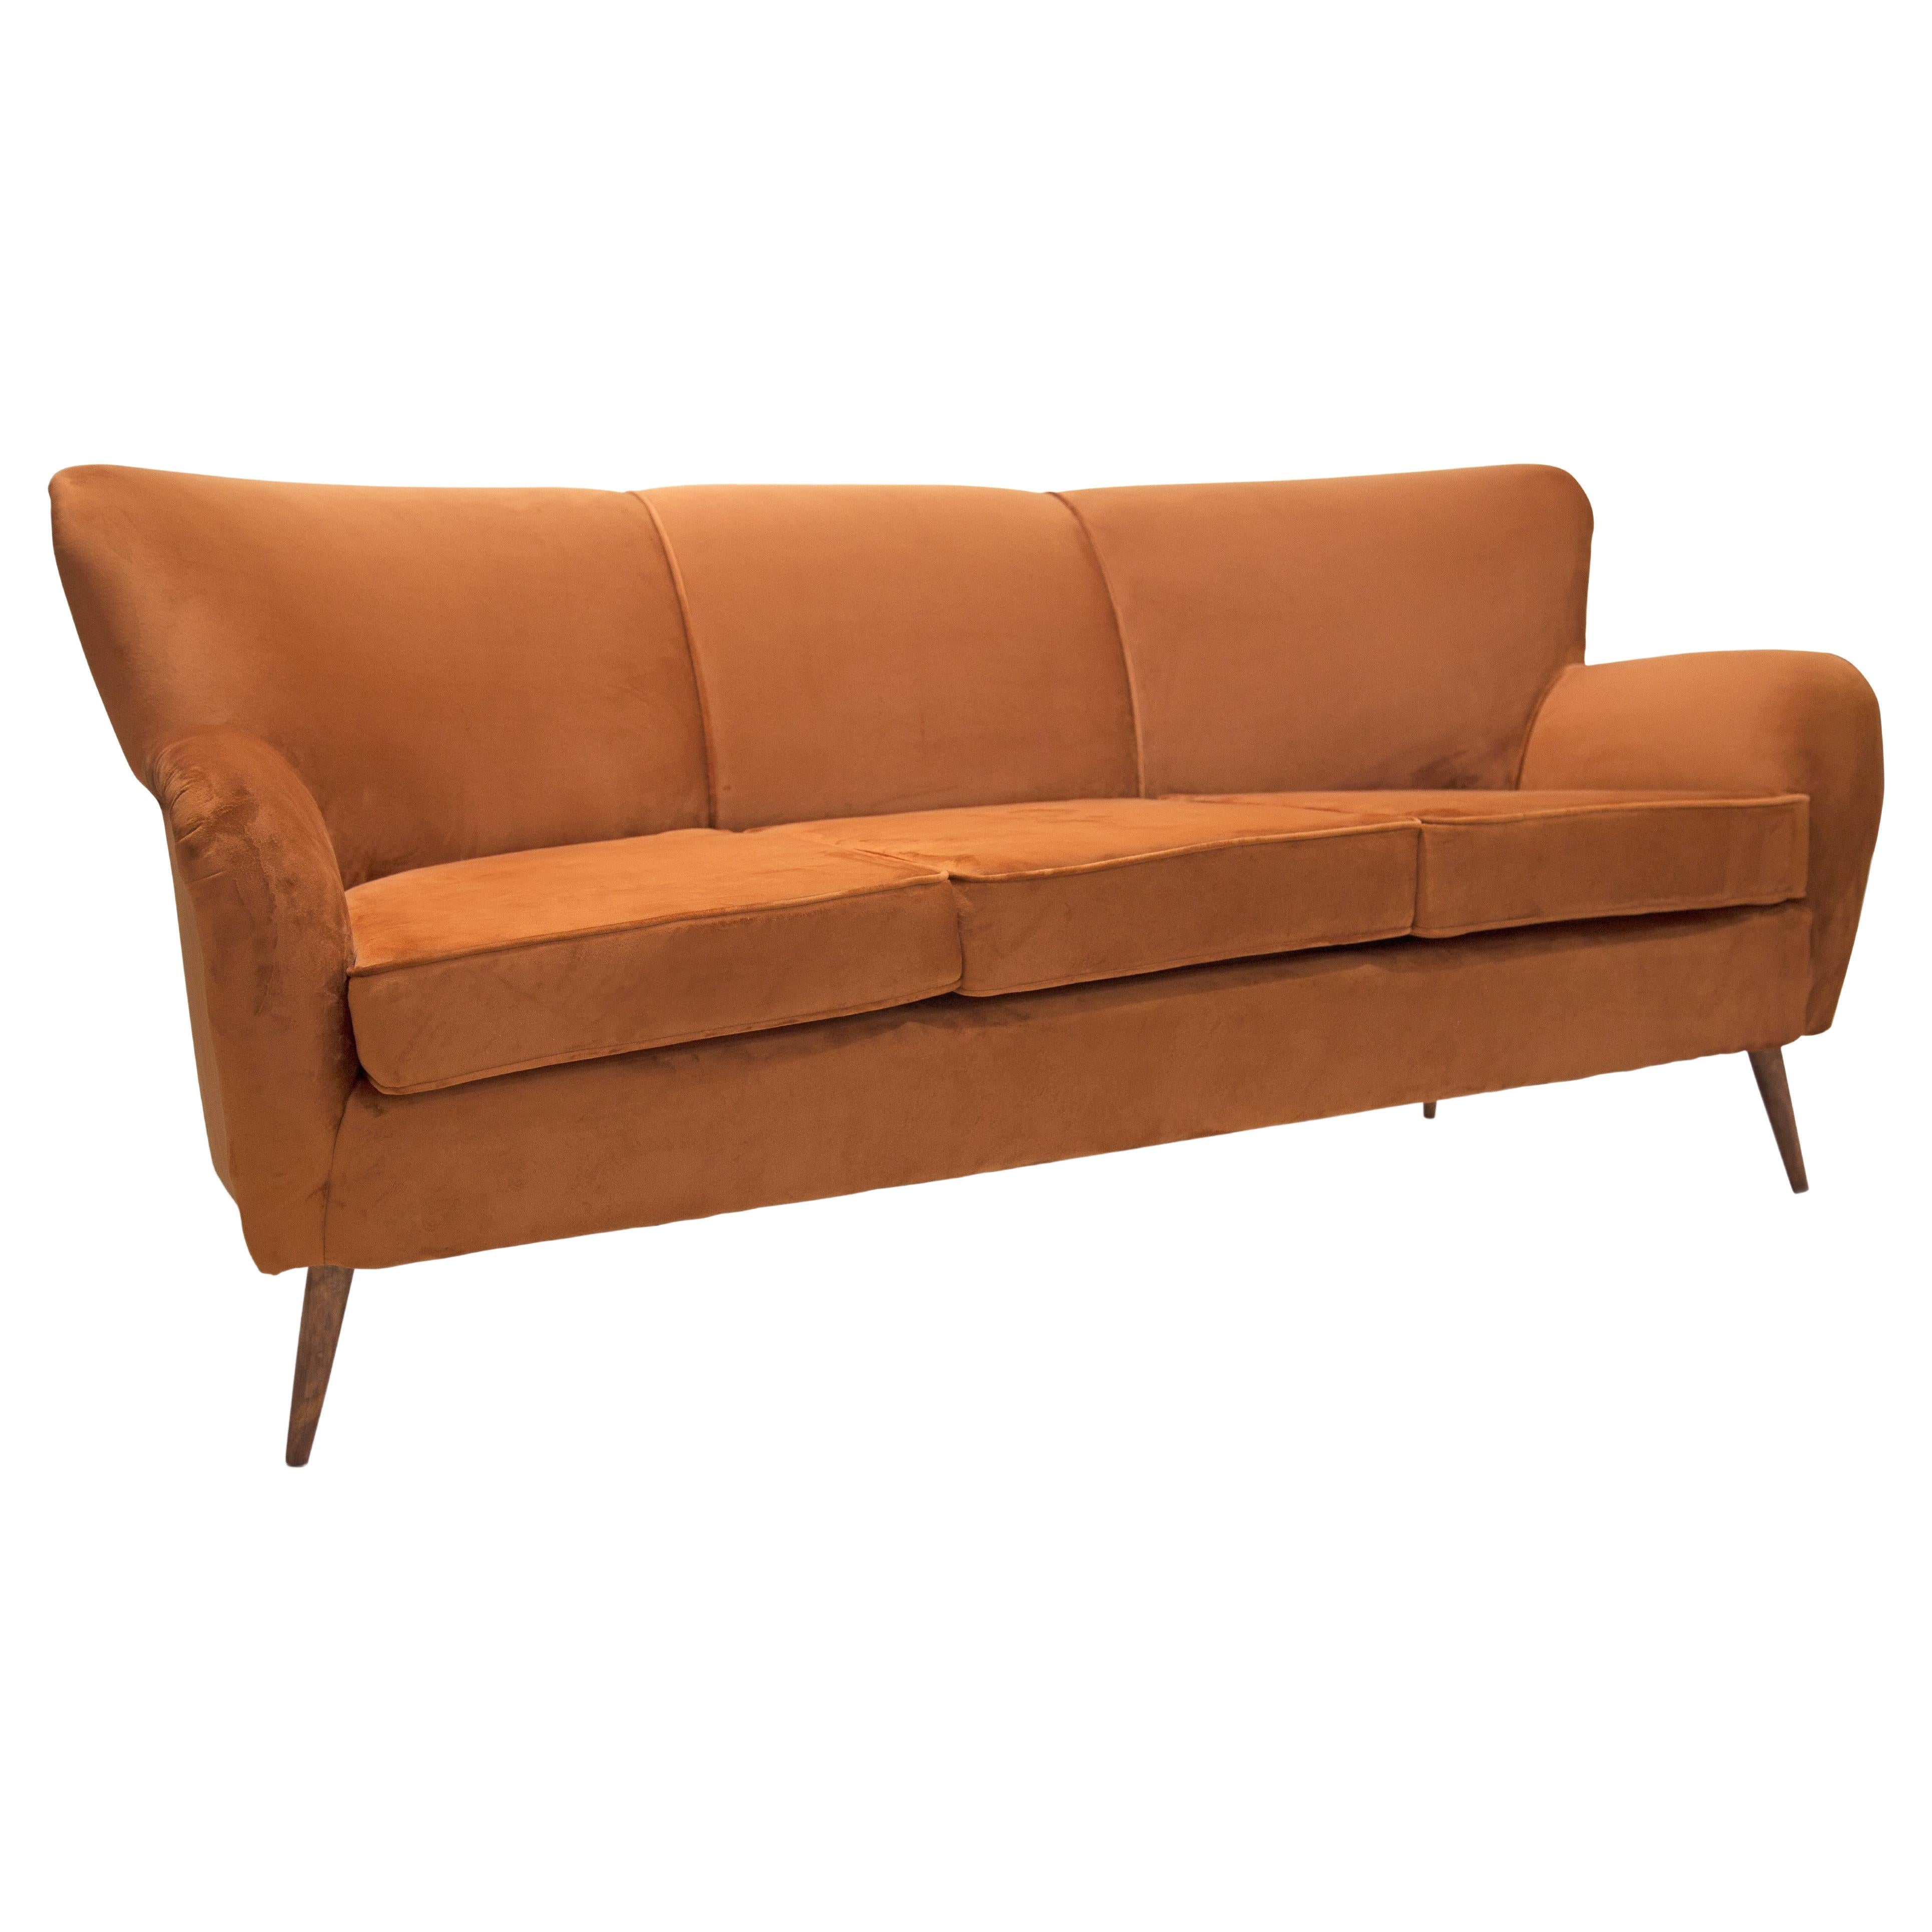 Available now, this Mid-Century Modern sofa has a hardwood structure with reupholstered Ochre velvet. The sofa has a tall backrest and comfortable arms making this sofa not only beautiful but comfortable and inviting. 

The wood has been